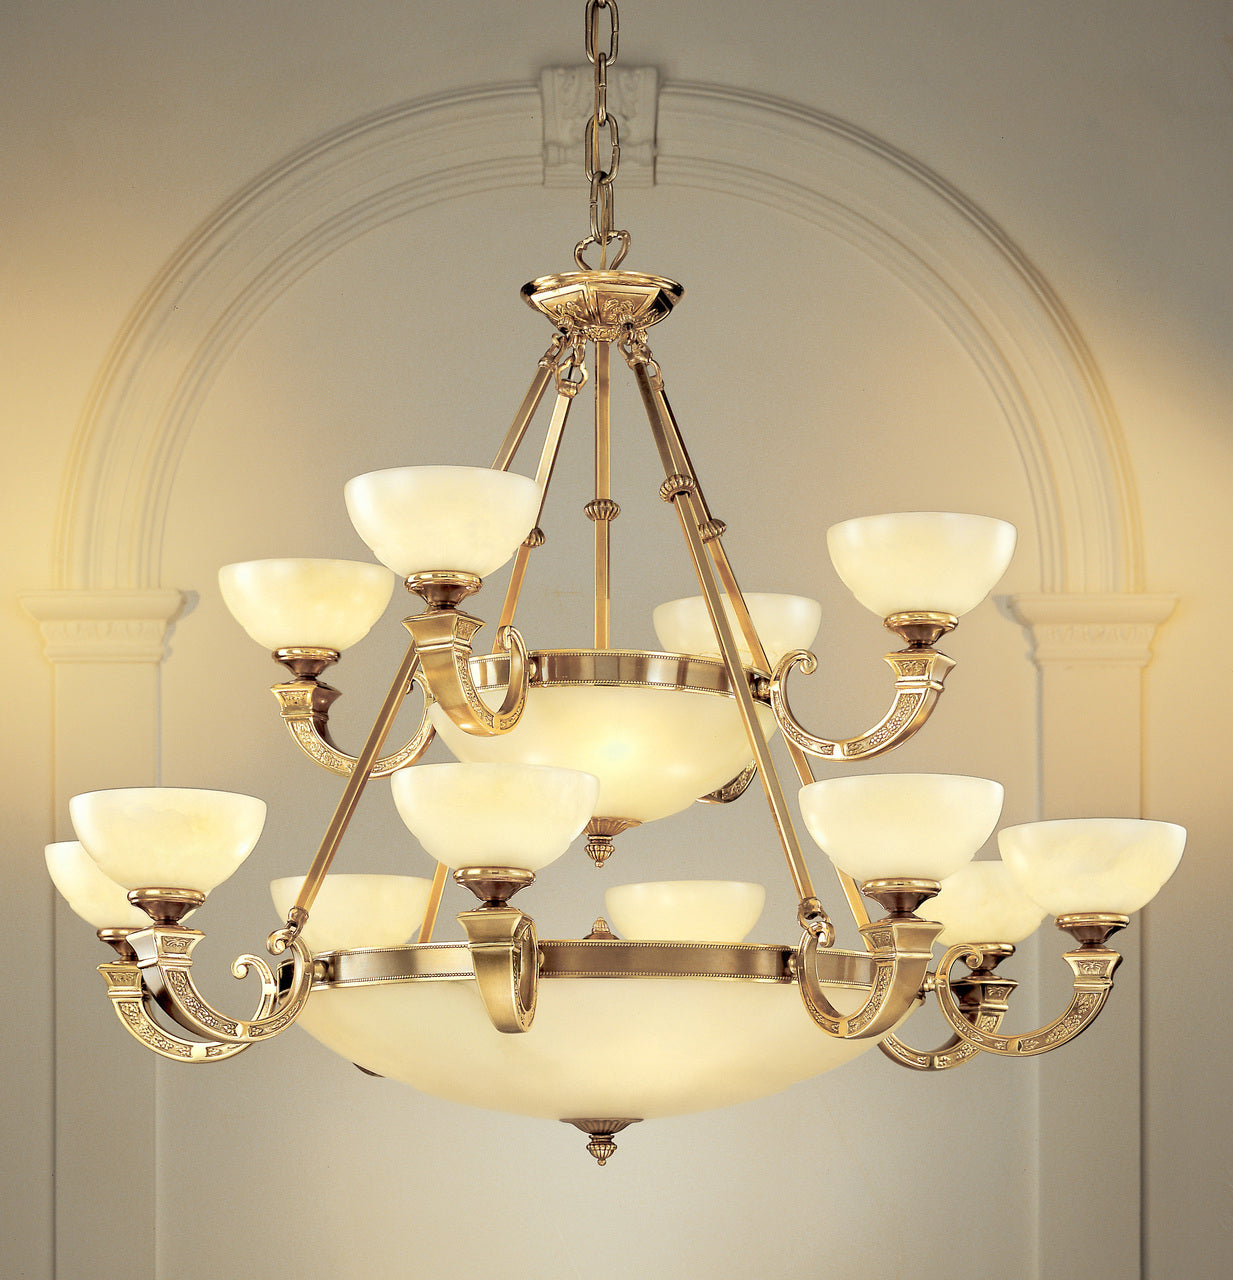 Classic Lighting 5624 ABZ Mallorca Alabaster Chandelier in Antique Bronze (Imported from Spain)